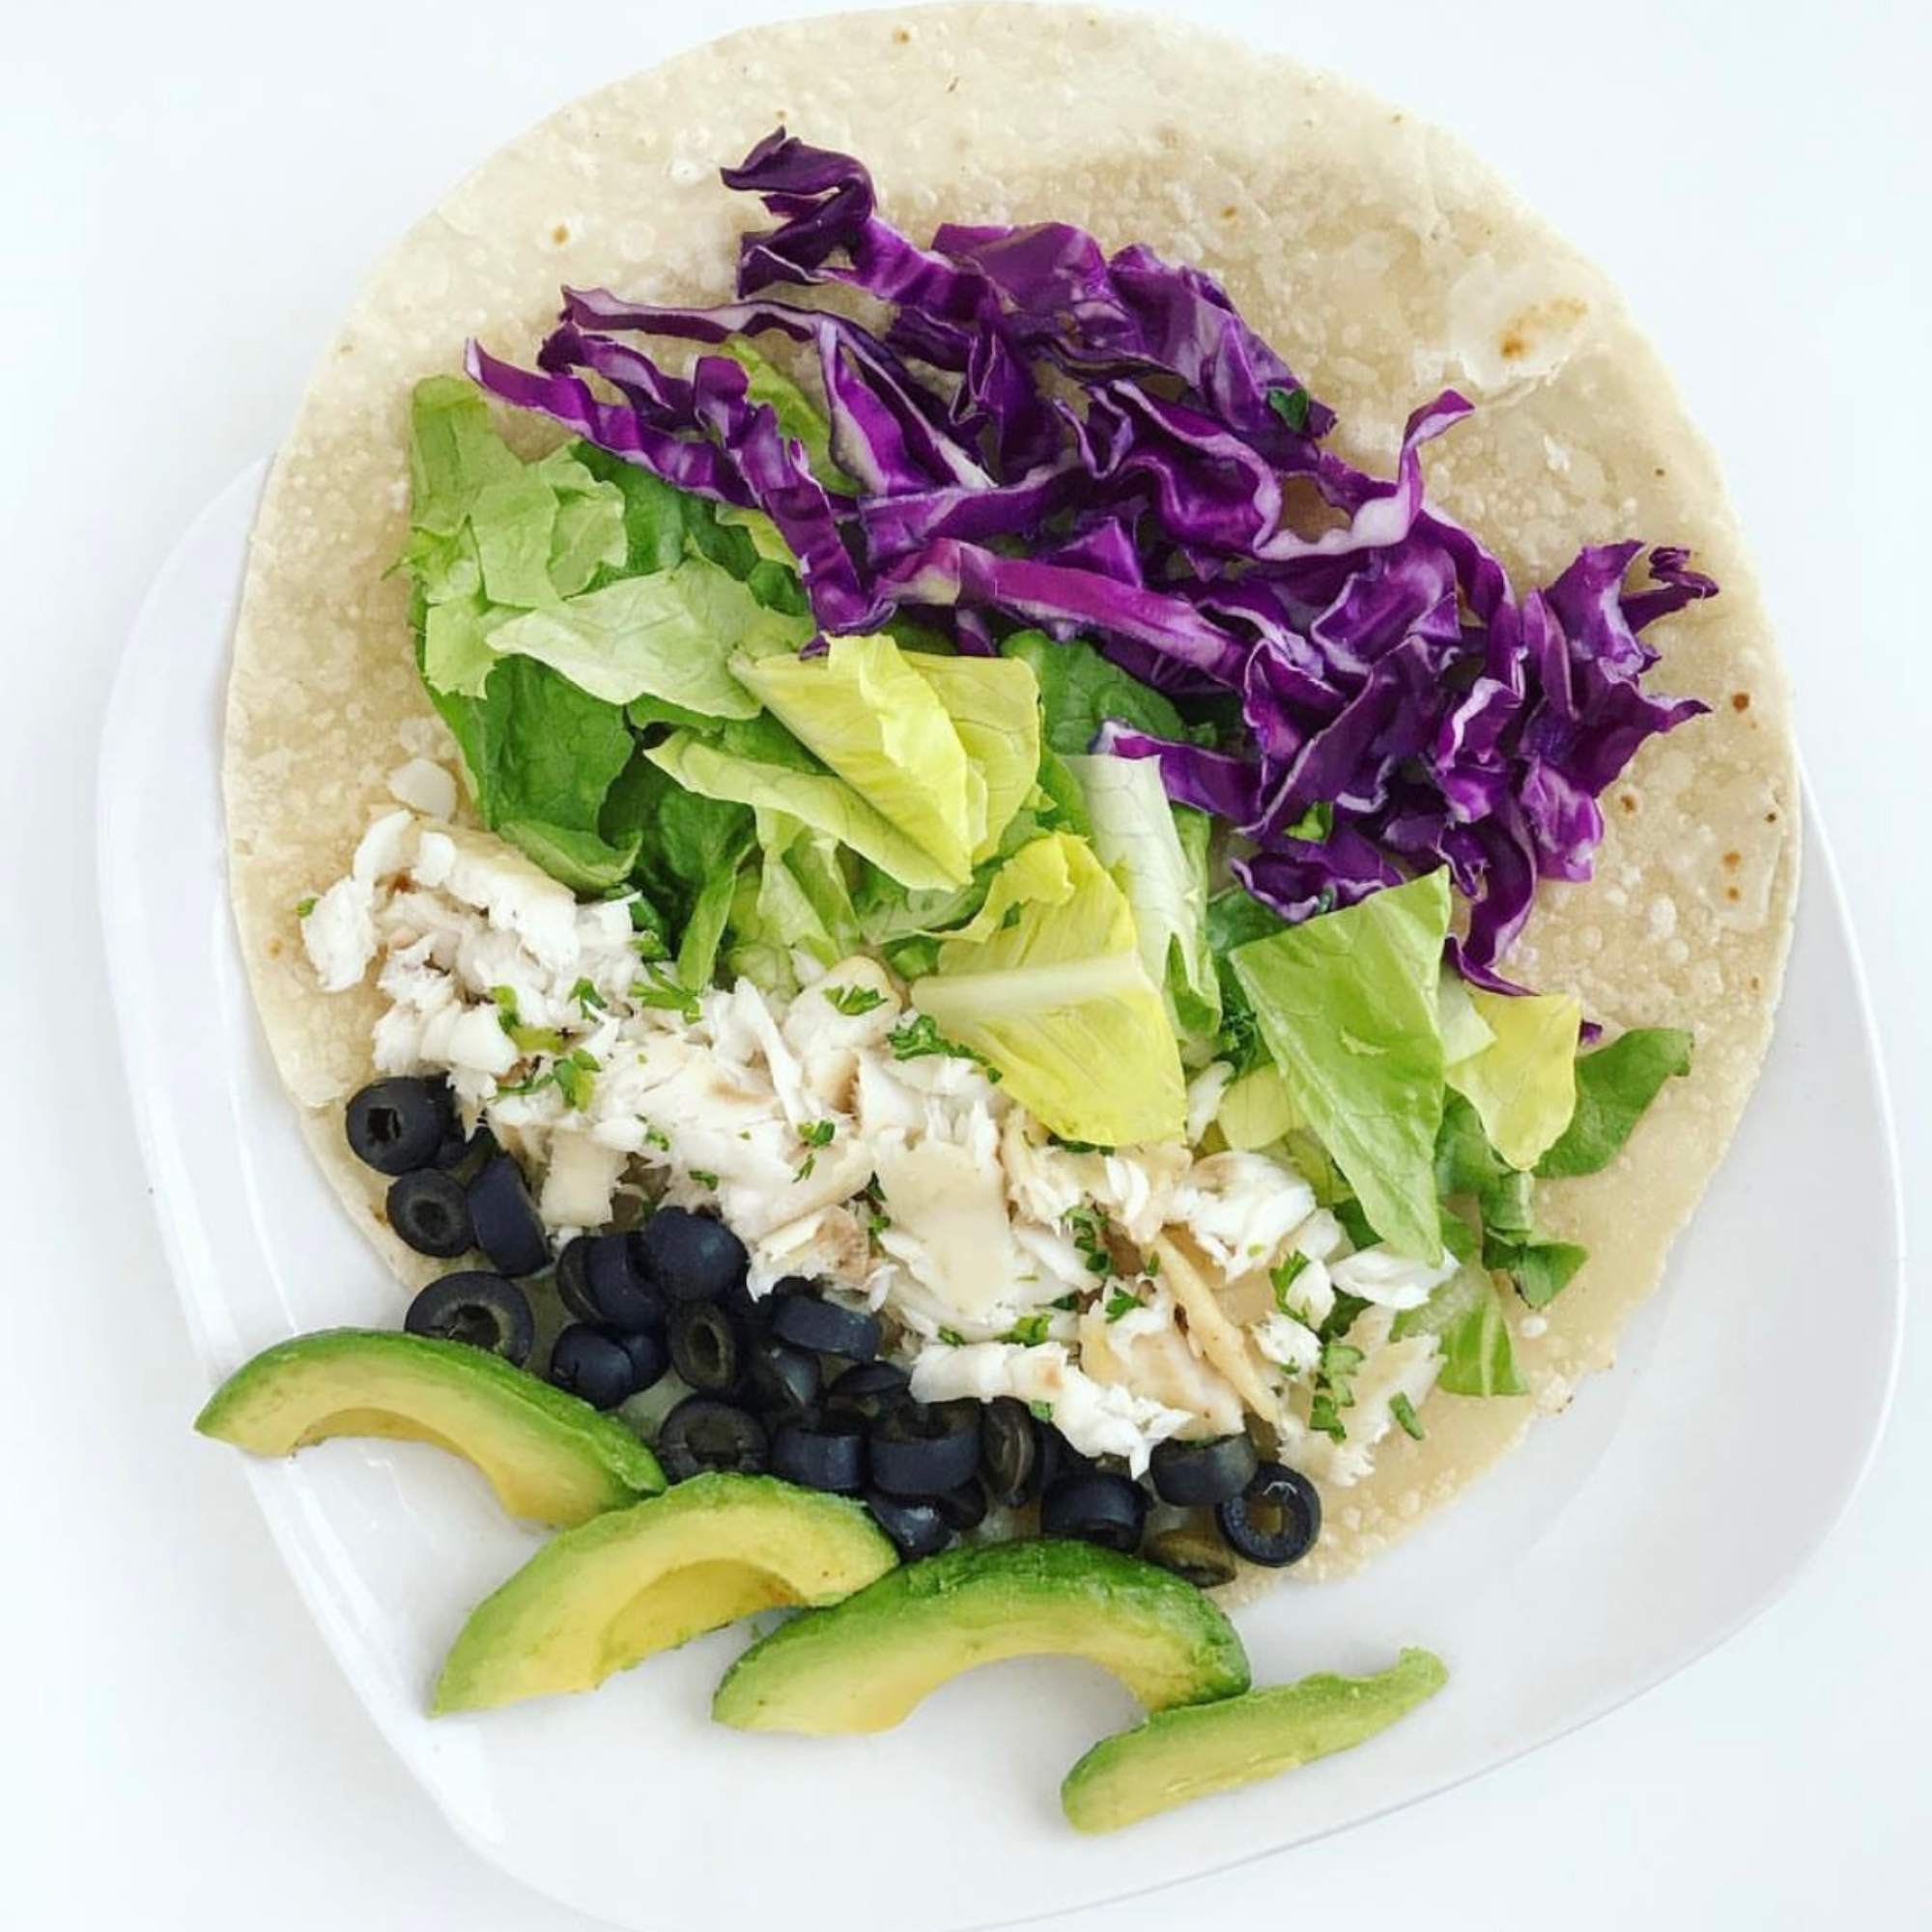 a grain free tortilla on a white plate with a row of purple cabbage, lettuce, tilapia and black olives with some sliced avacado on the side